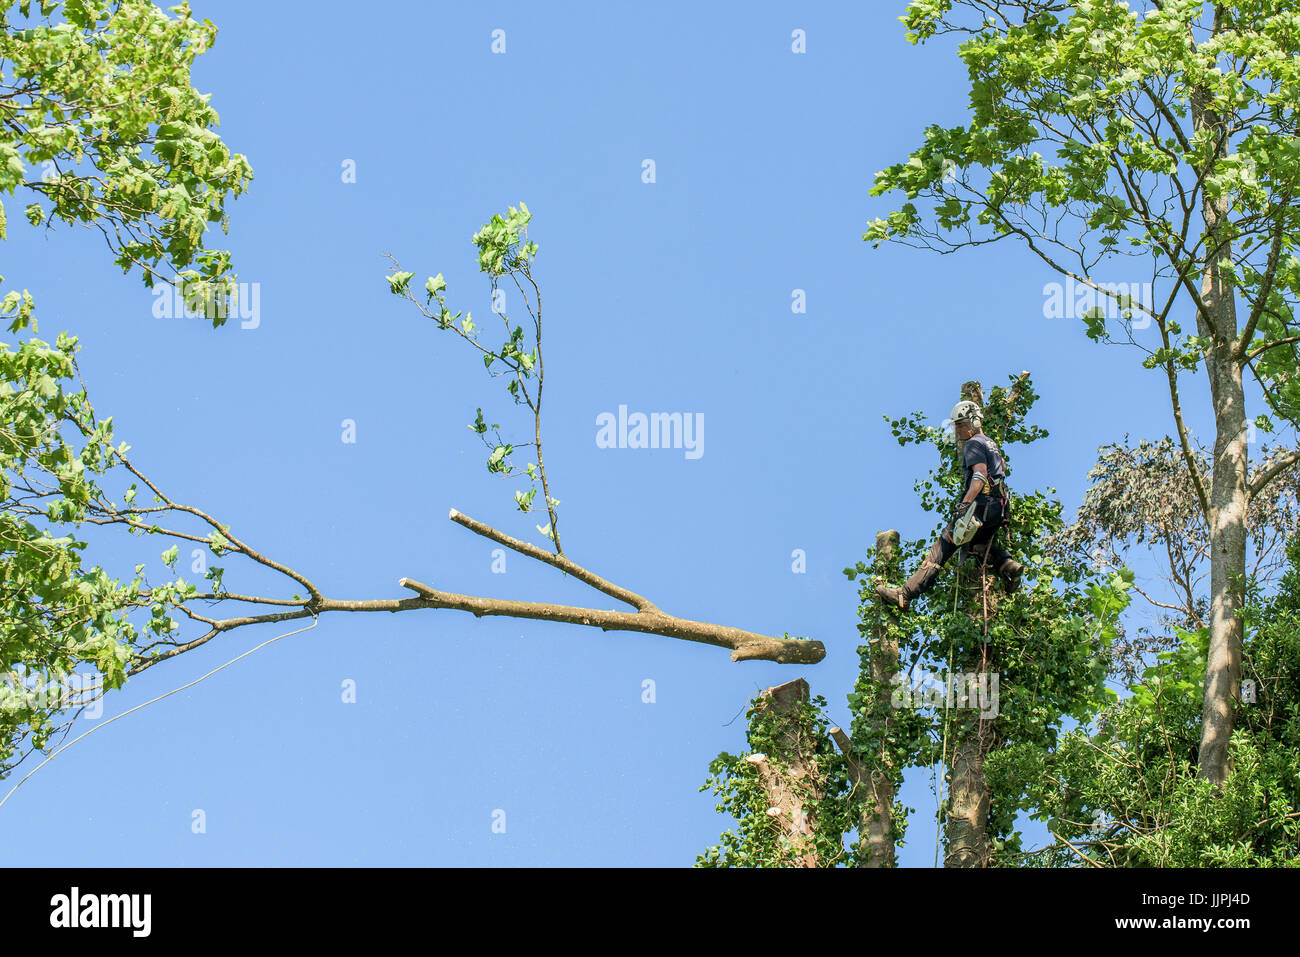 A tree surgeon cutting a branch of a tree. Stock Photo